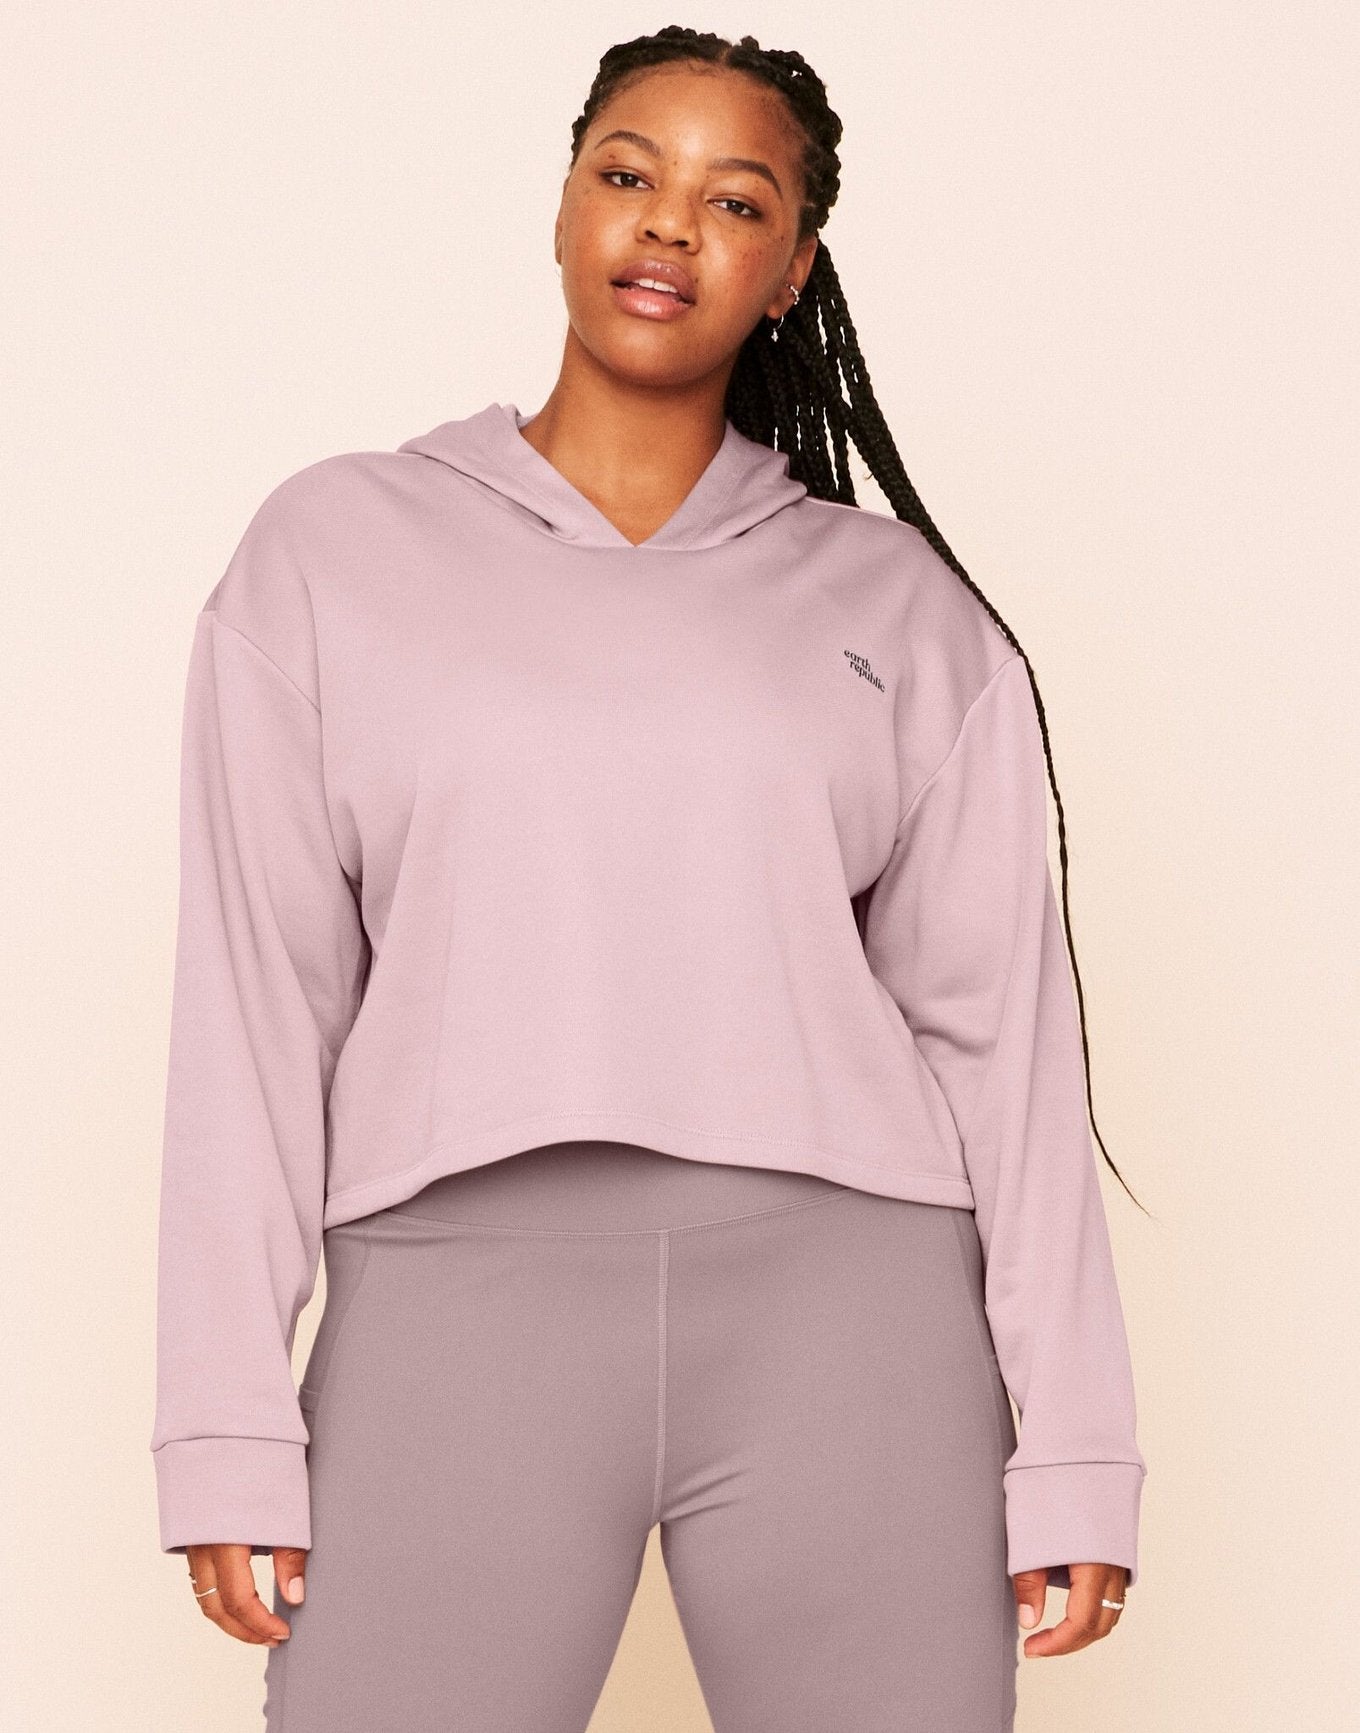 Earth Republic Myah Escape Luxe Hoodie Cropped Hoodie in color Chalk Pink and shape hoodie